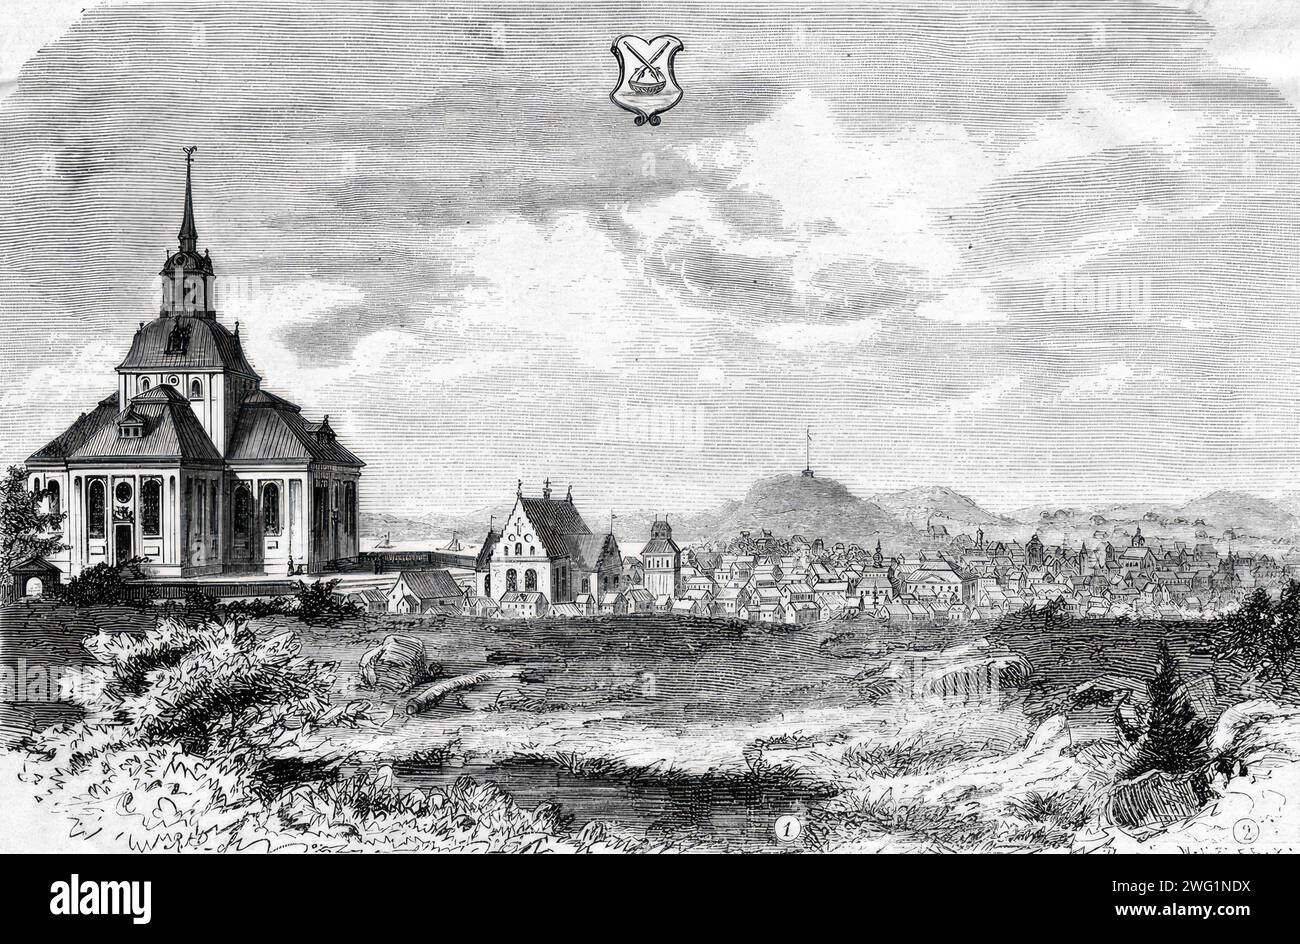 &quot;S&#xf6;derhamn, burned by the Russians in 1721.&quot; City view, newspaper illustration from the second half of the 19th century. Stock Photo